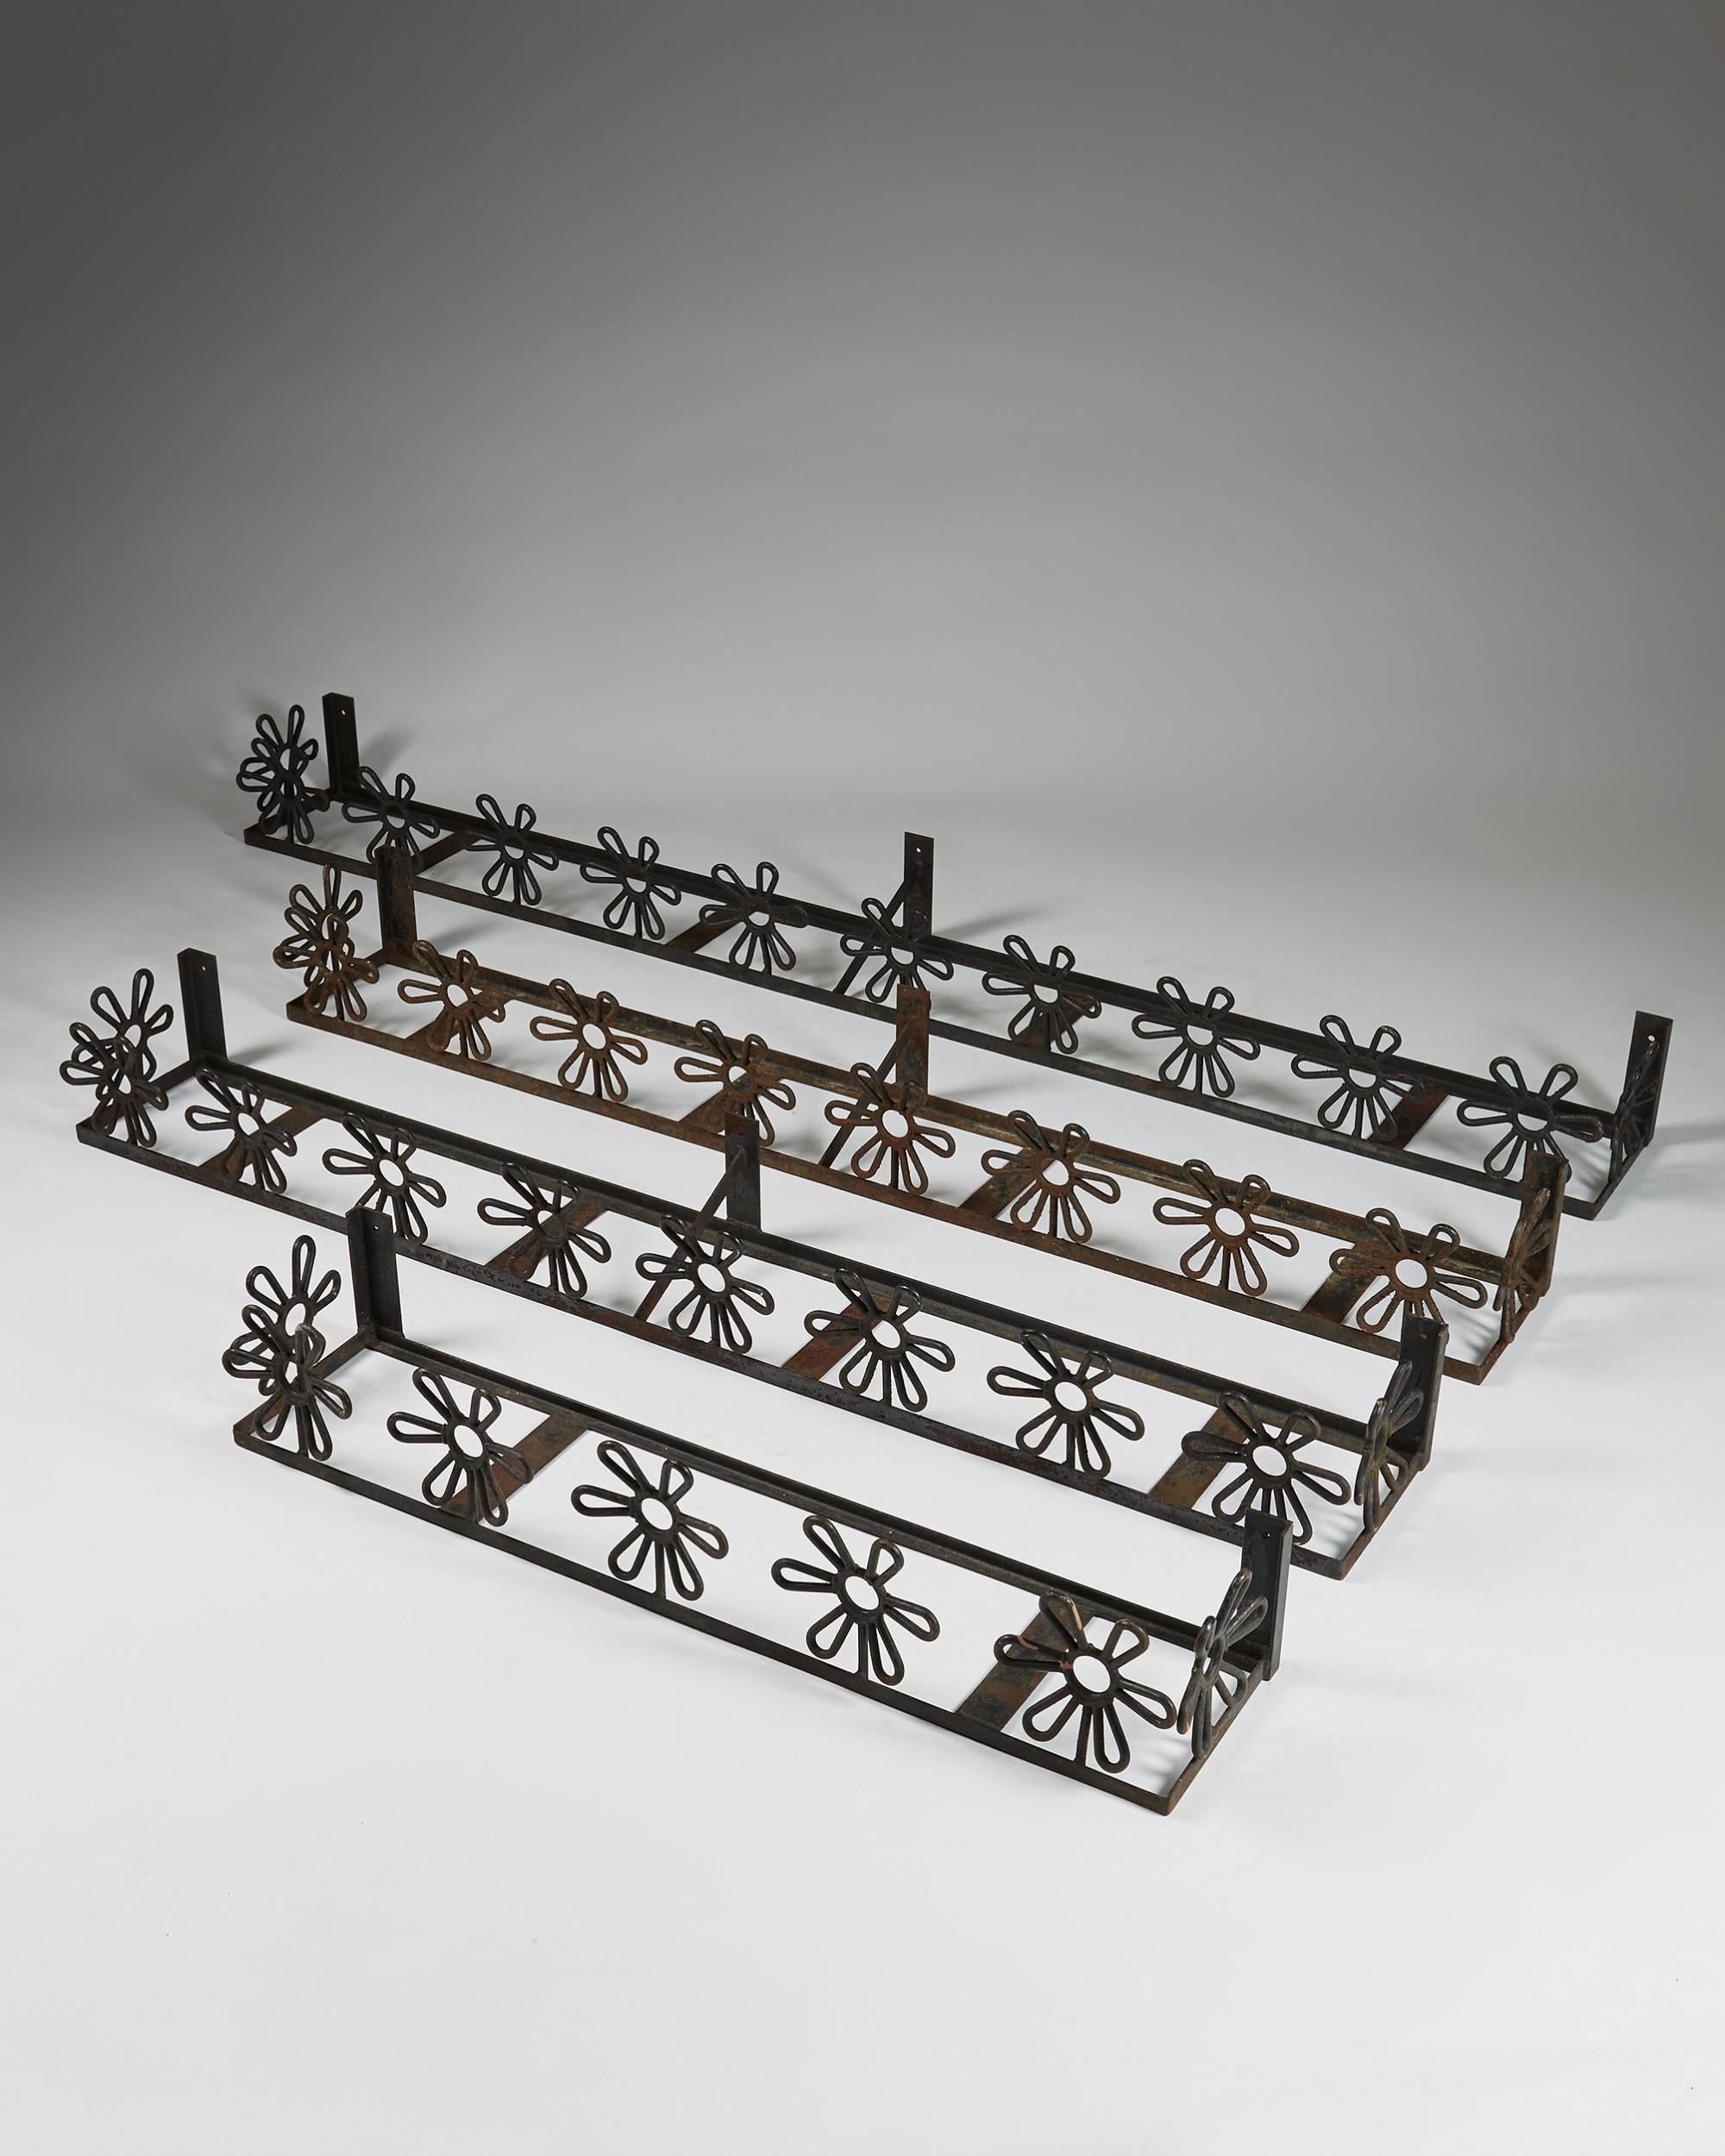 Flower boxes anonymous,
Sweden, 1950s.

Forged iron.

Measures: Length of the largest 186 cm/ 6' 1''
Height 16 cm/ 6 1/4''
Depth 21 cm/ 8 1/4''

Length of the medium sized 146 cm/ 4' 9 1/2''
Height 16 cm/ 6 1/4''
Depth 21 cm/ 8